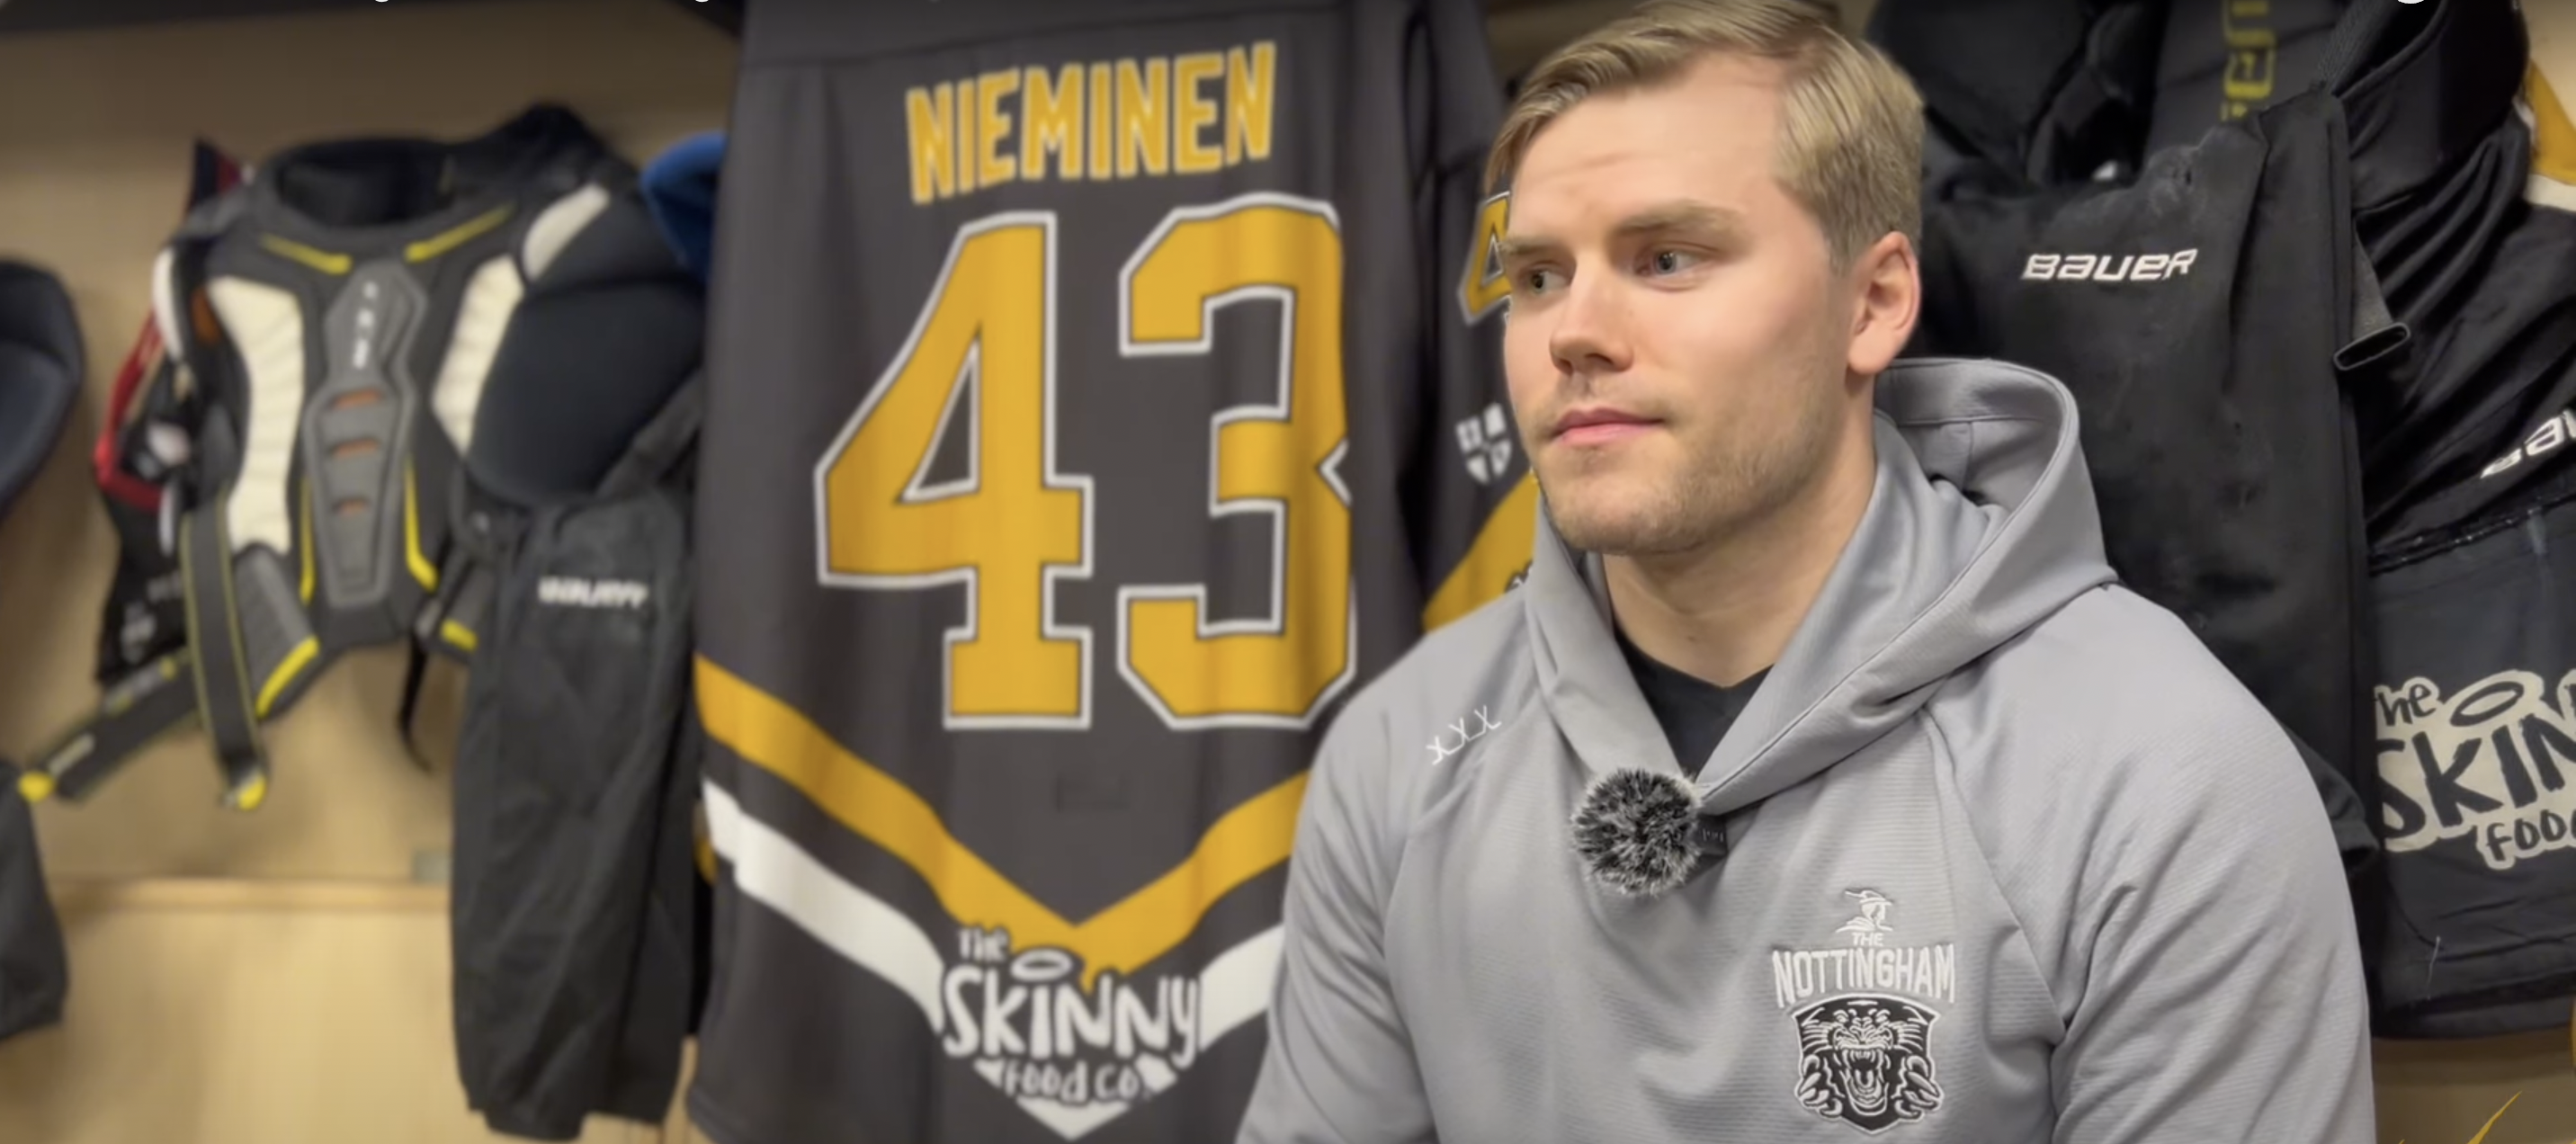 NIEMINEN CHATS TO PANTHERS TV AFTER INDUCTION DAY Top Image